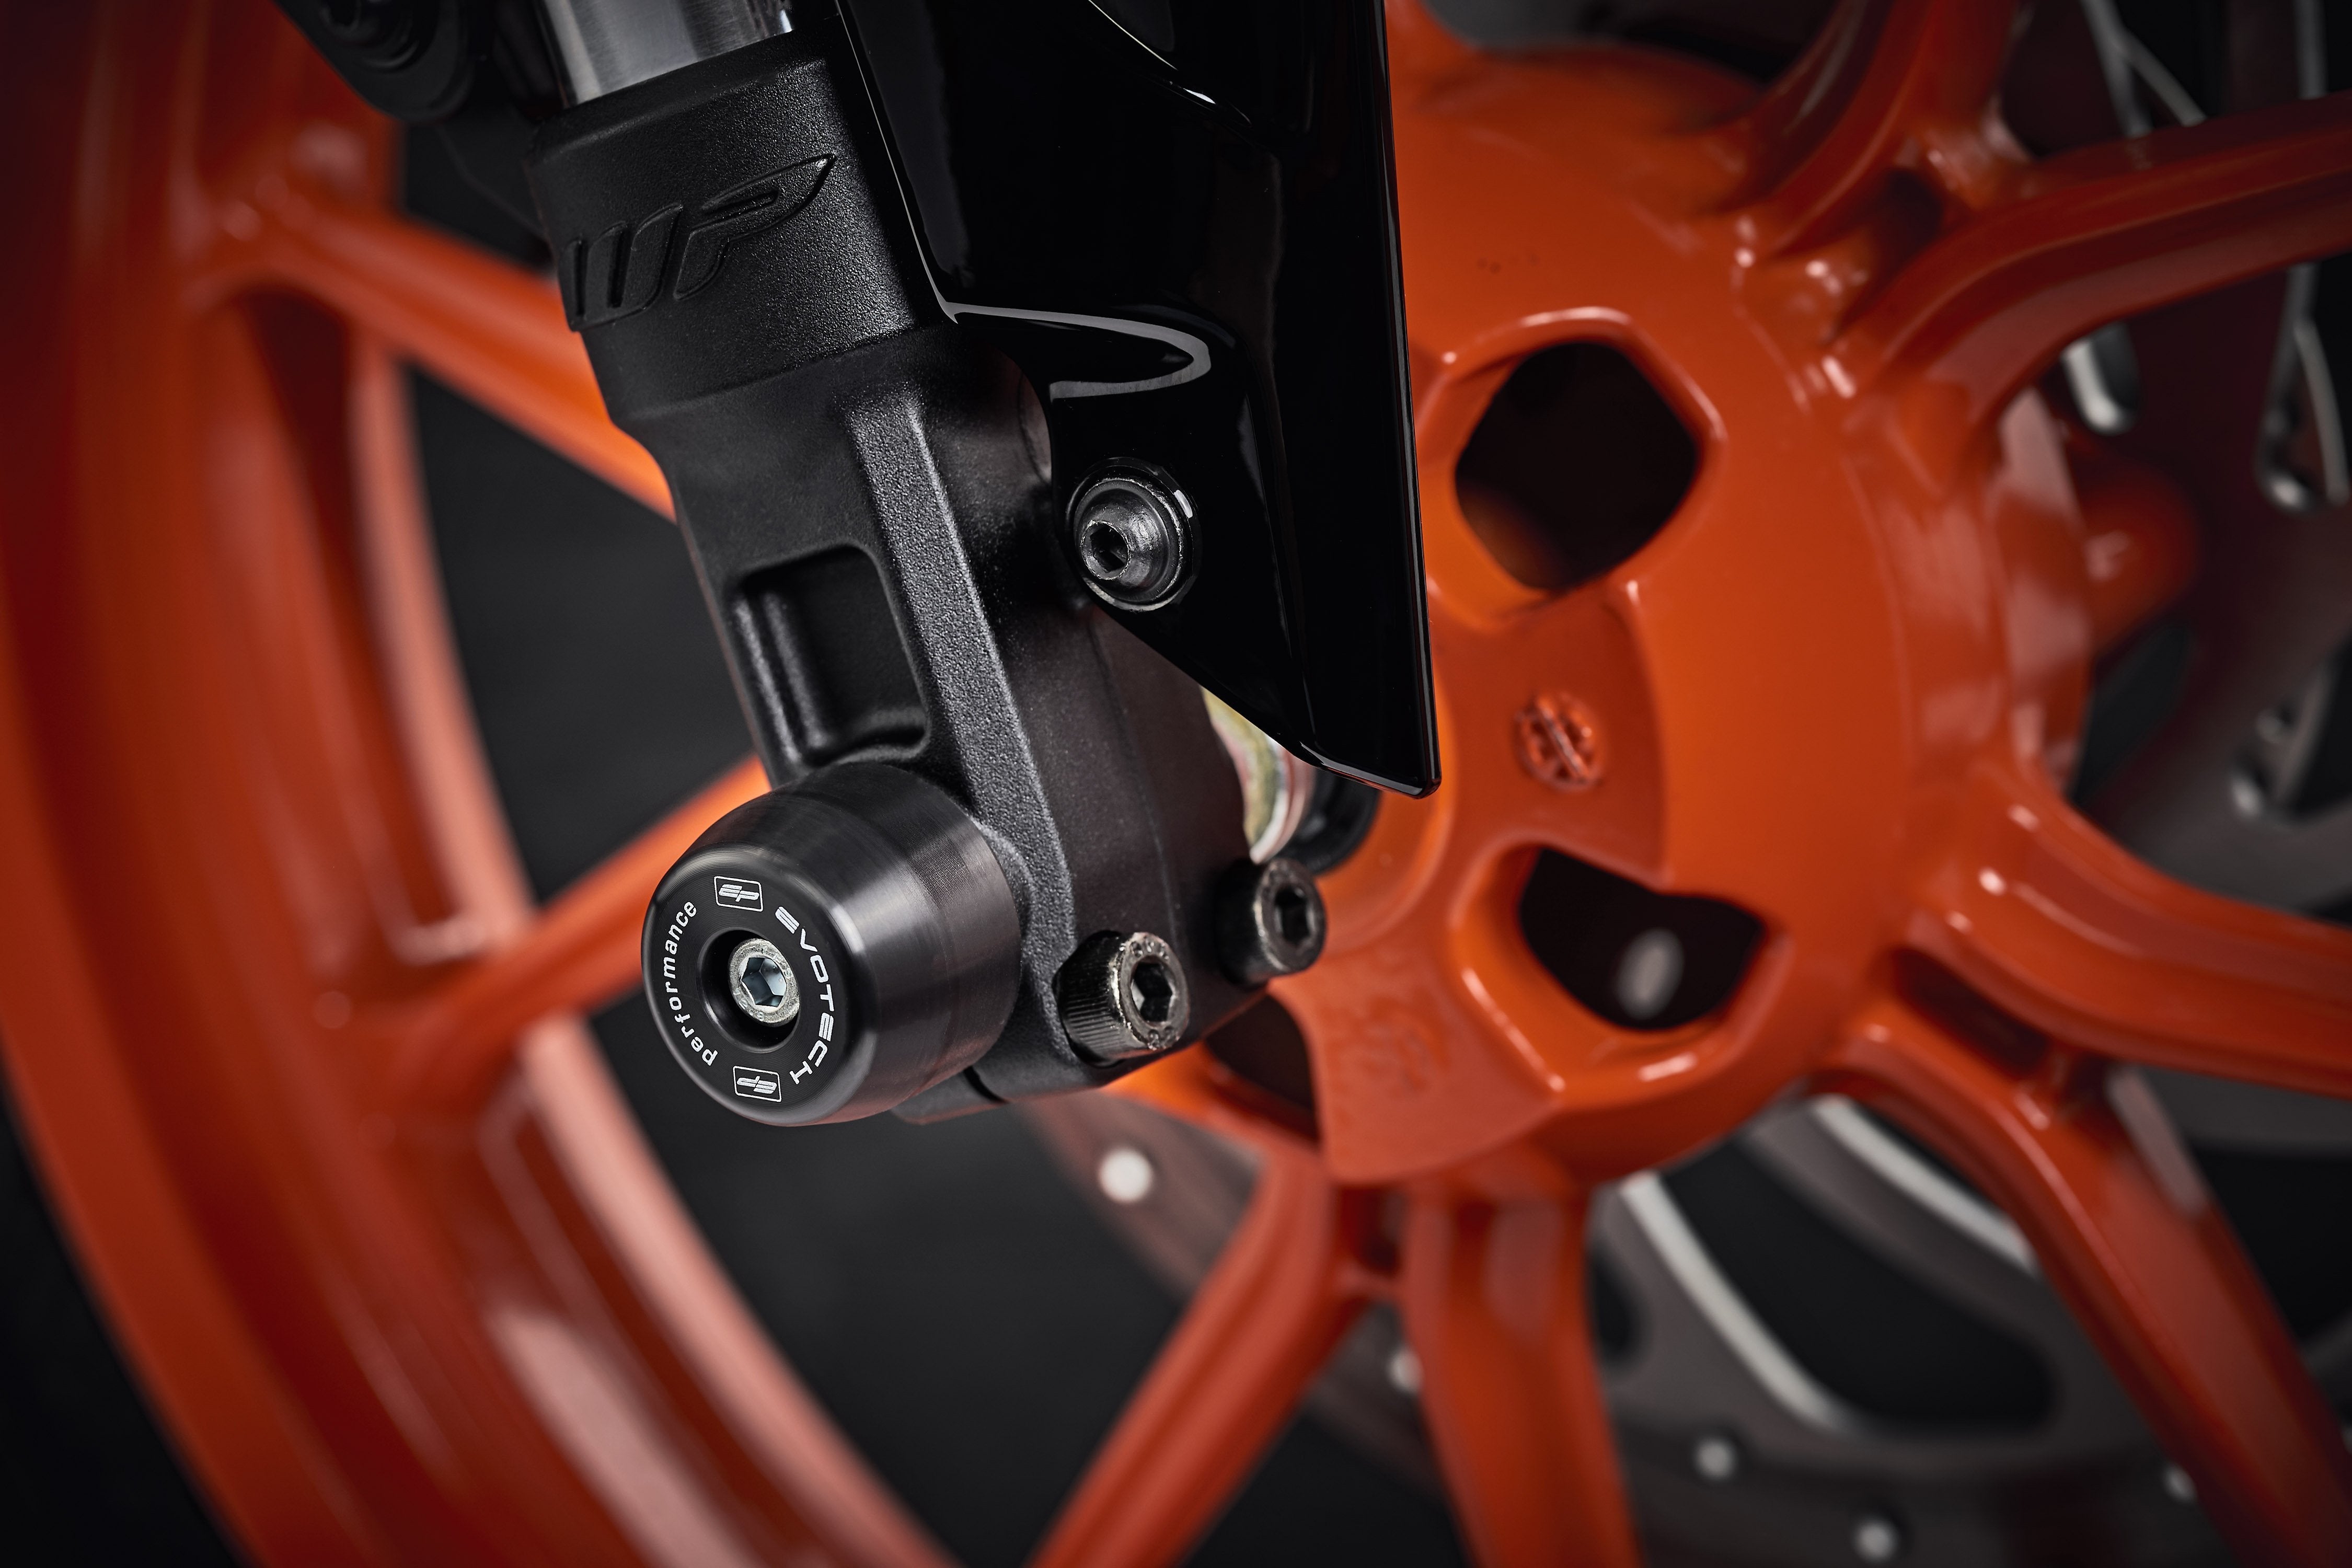 The lower front fork of the KTM 200 Duke with EP Front Spindle Bobbins securely attached, offering crash protection to the motorcycleâs front wheel.